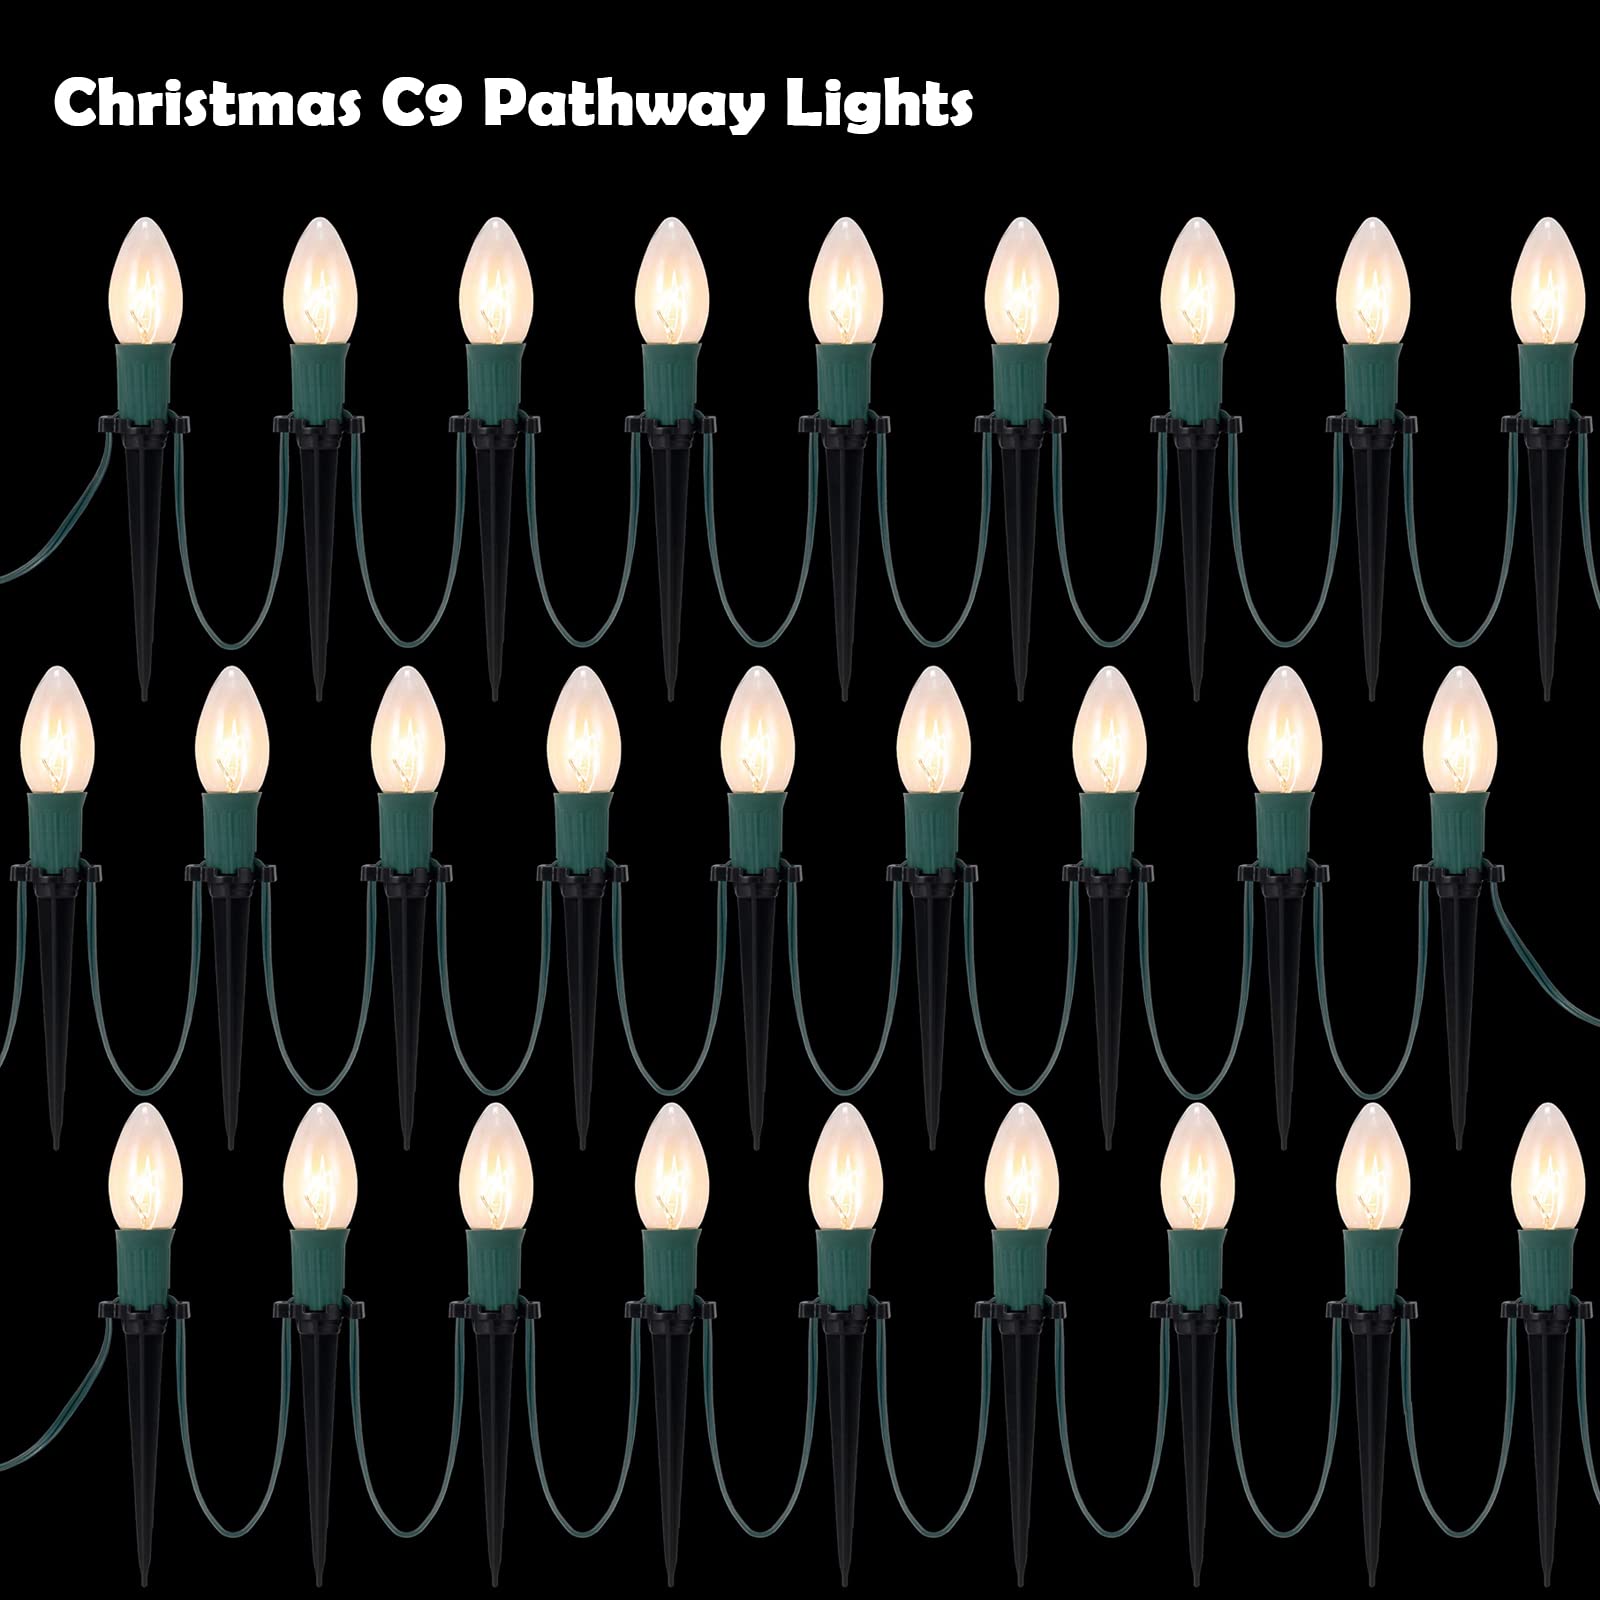 Lumiparty C9 Christmas Lights Outdoor Pathway Marker String Lights 30.75FT Christmas Lights with 24 Bulbs and Stakes for Outdoor Yard, Christmas Decor, Holiday Sidewalk Driveway Christmas Decoration